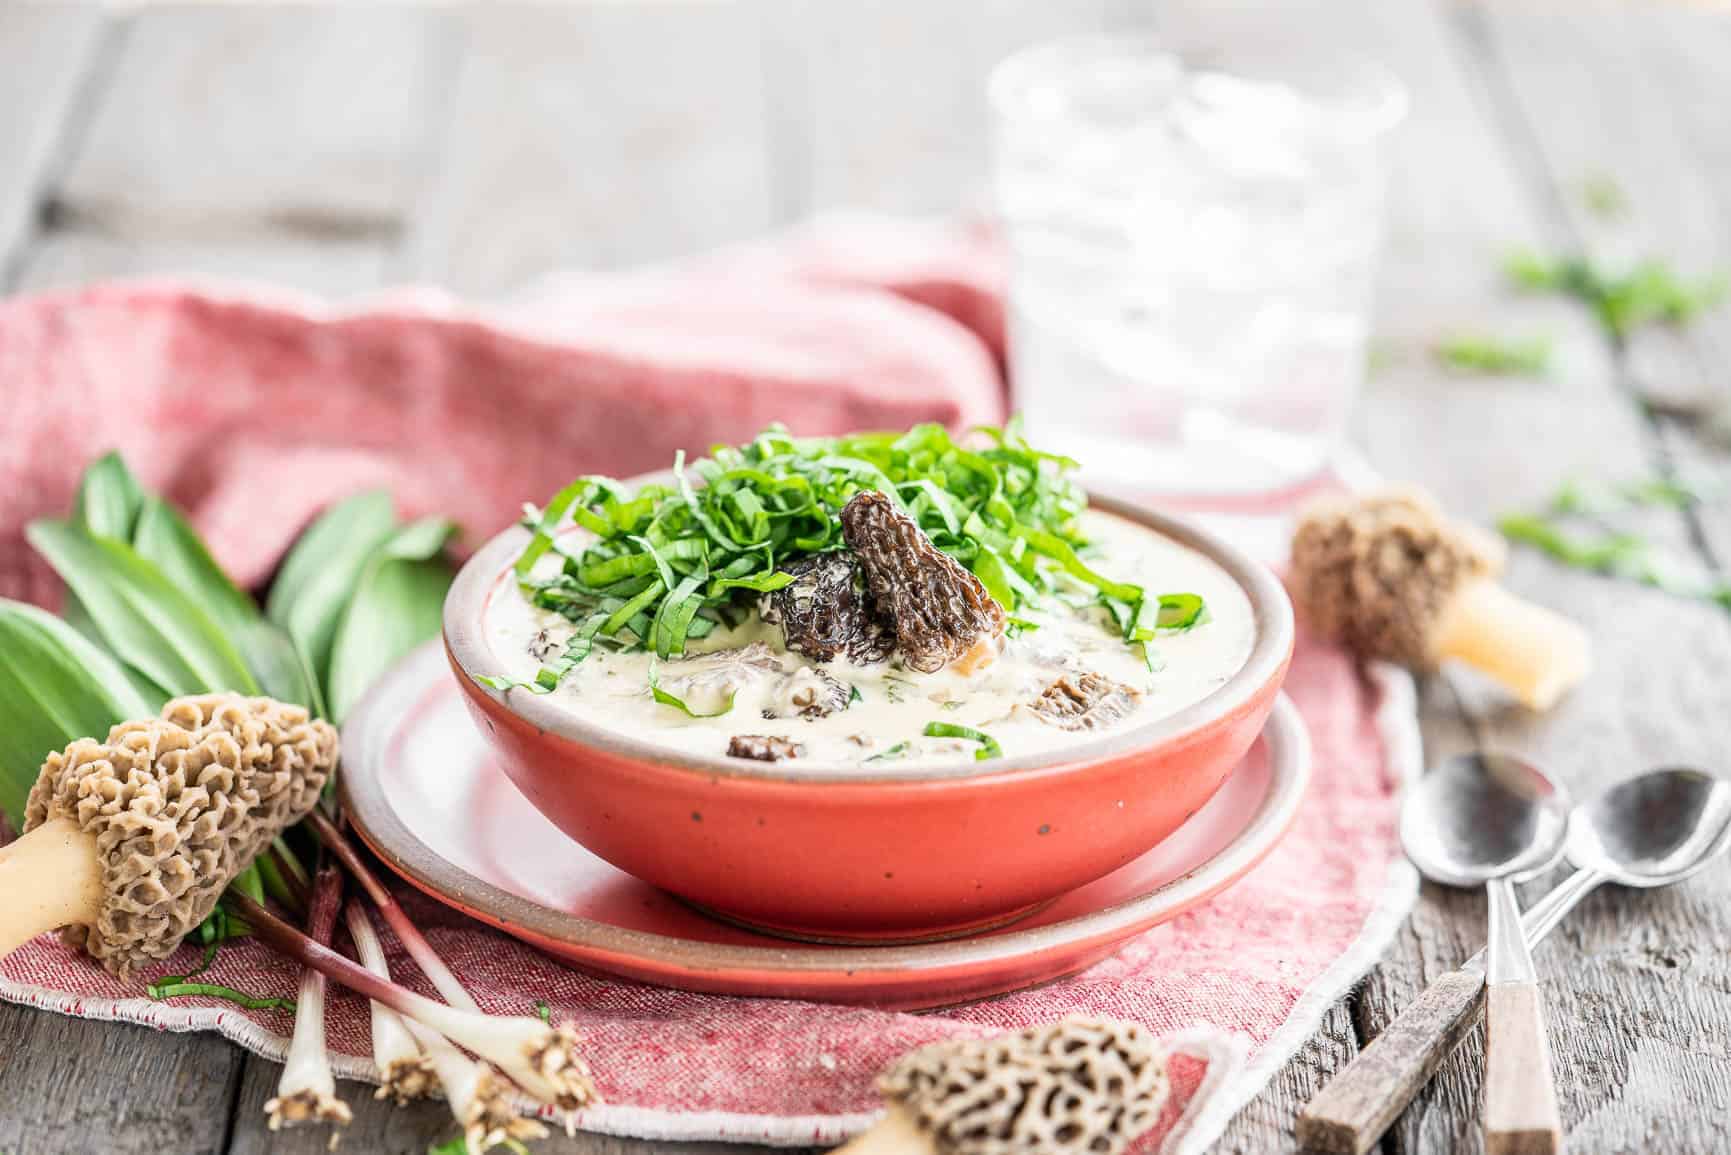 The Best Soup of Spring; Easy Morel Mushroom and Ramp Chowder